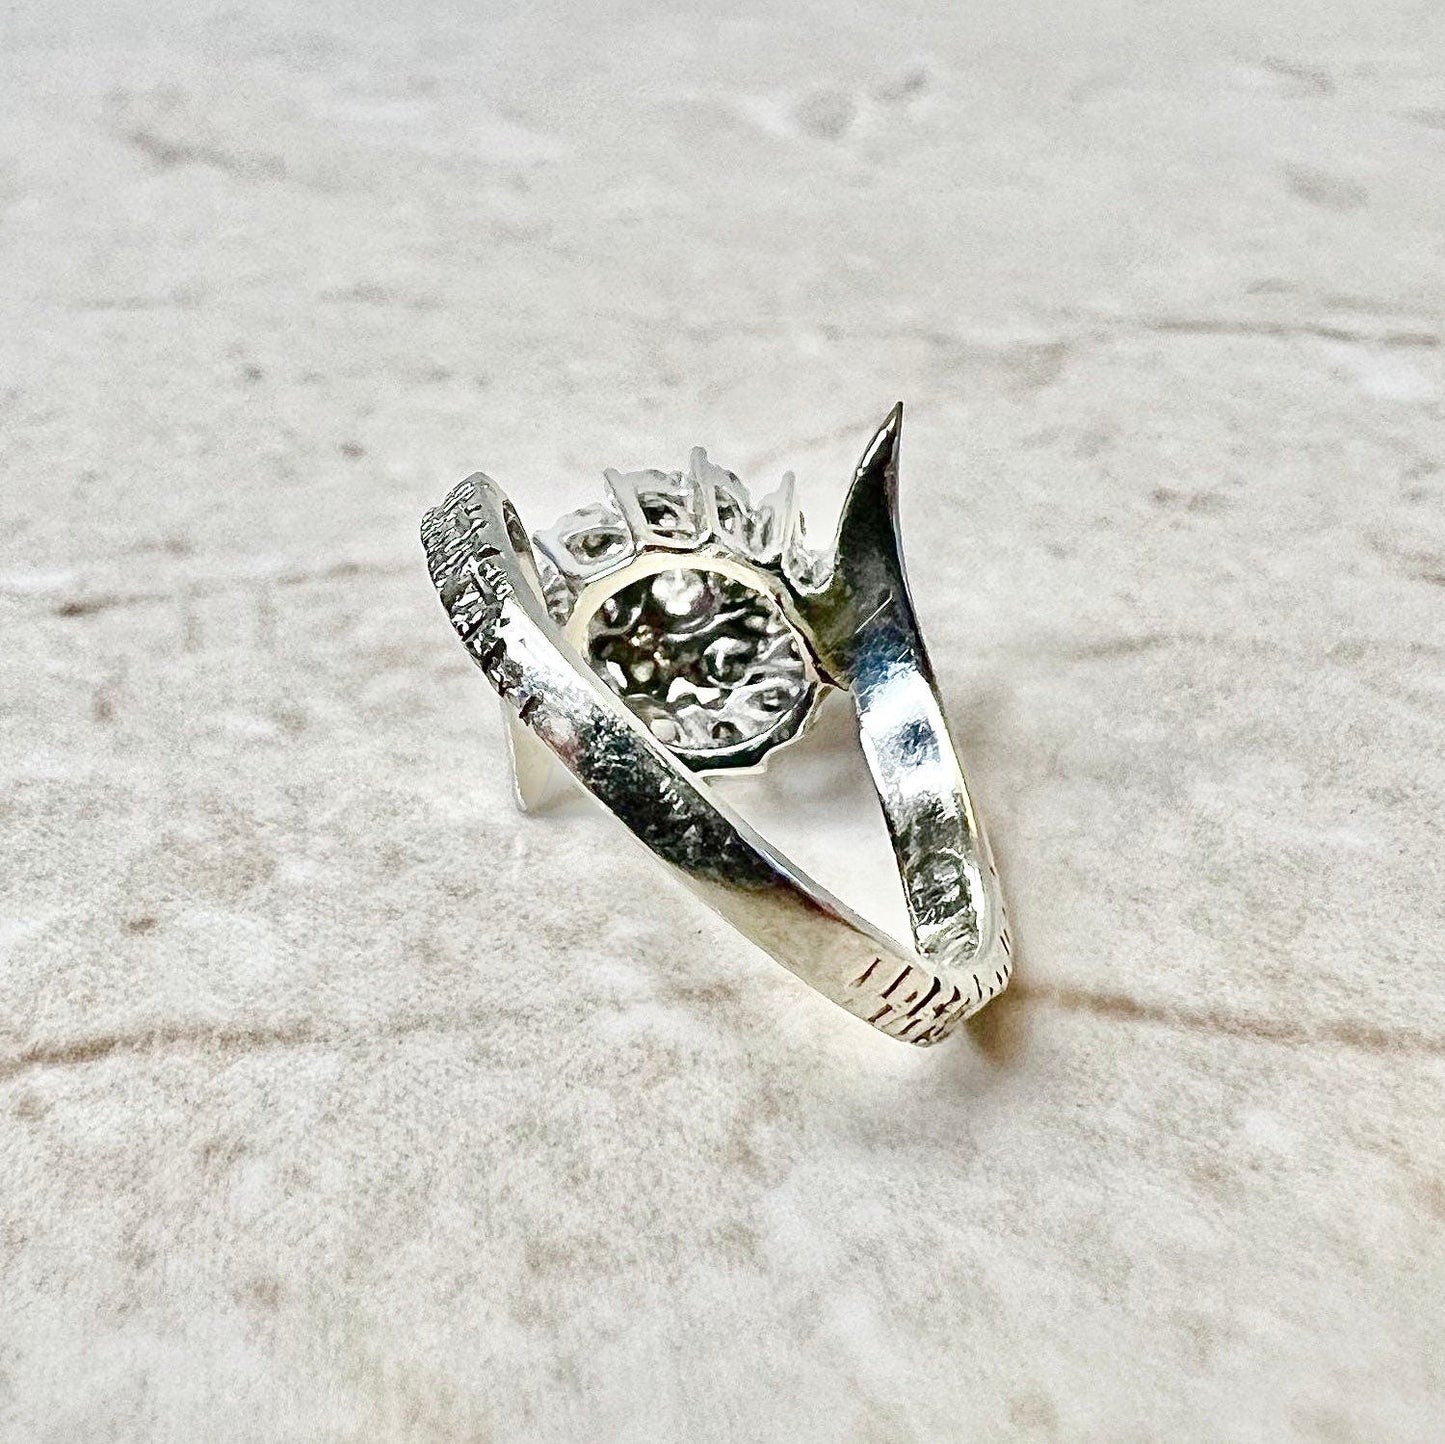 14K Cluster Diamond Ring - White Gold Diamond Cocktail Ring - Cluster Ring - Wedding Ring - Best Gifts For Her - Anniversary Ring